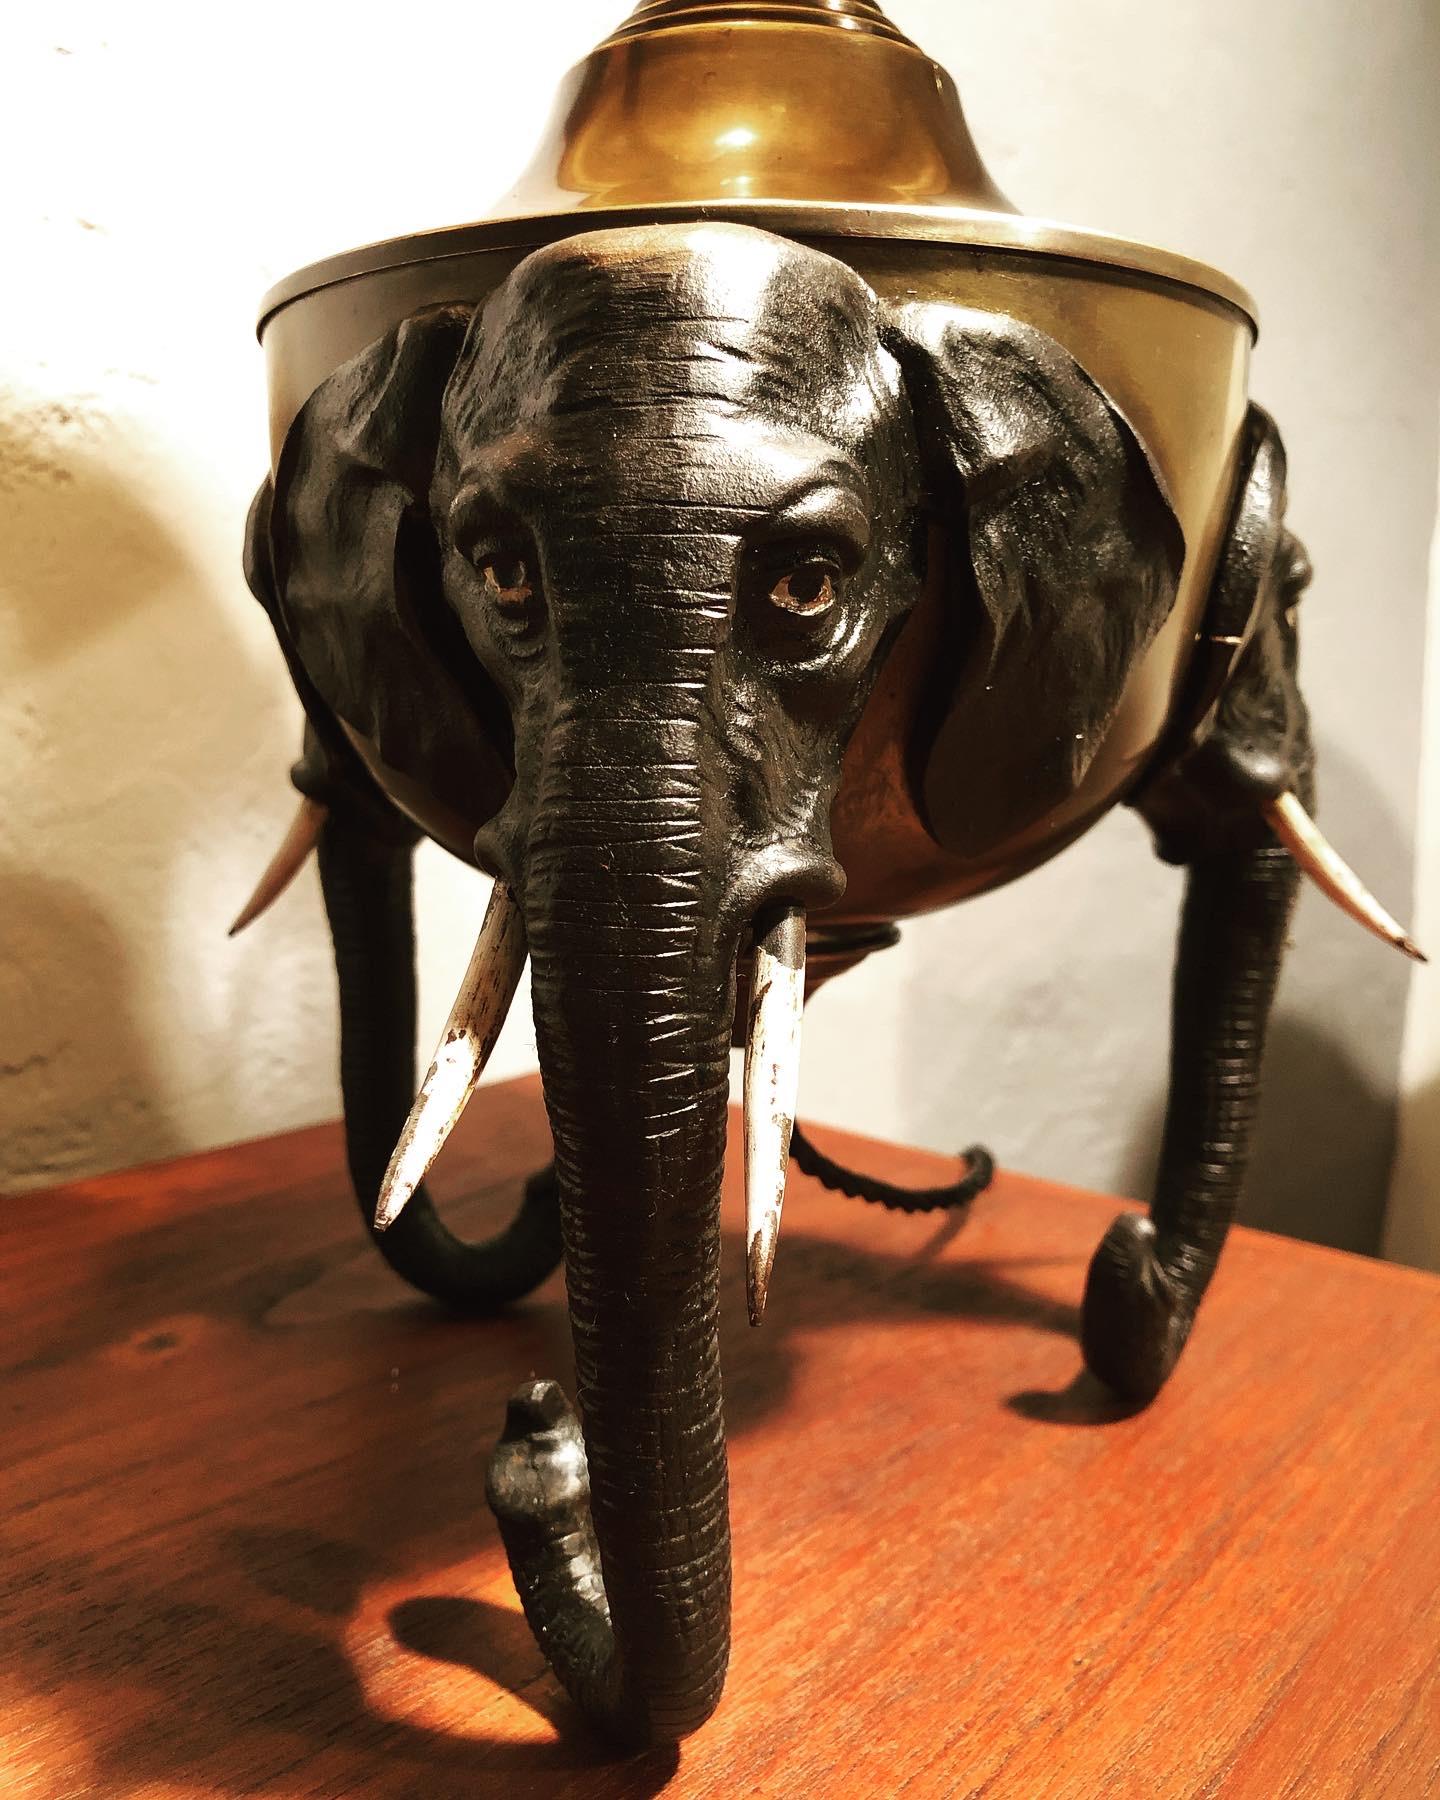 Rare antique Art Nouveau elephant lamp from the early 1900s.
Raised on 3 elephant heads in painted cast iron.
Original lampshade in brass with a great patina to the surface.
6 glass windows in the shade in green, blue, green and clear glass on top .